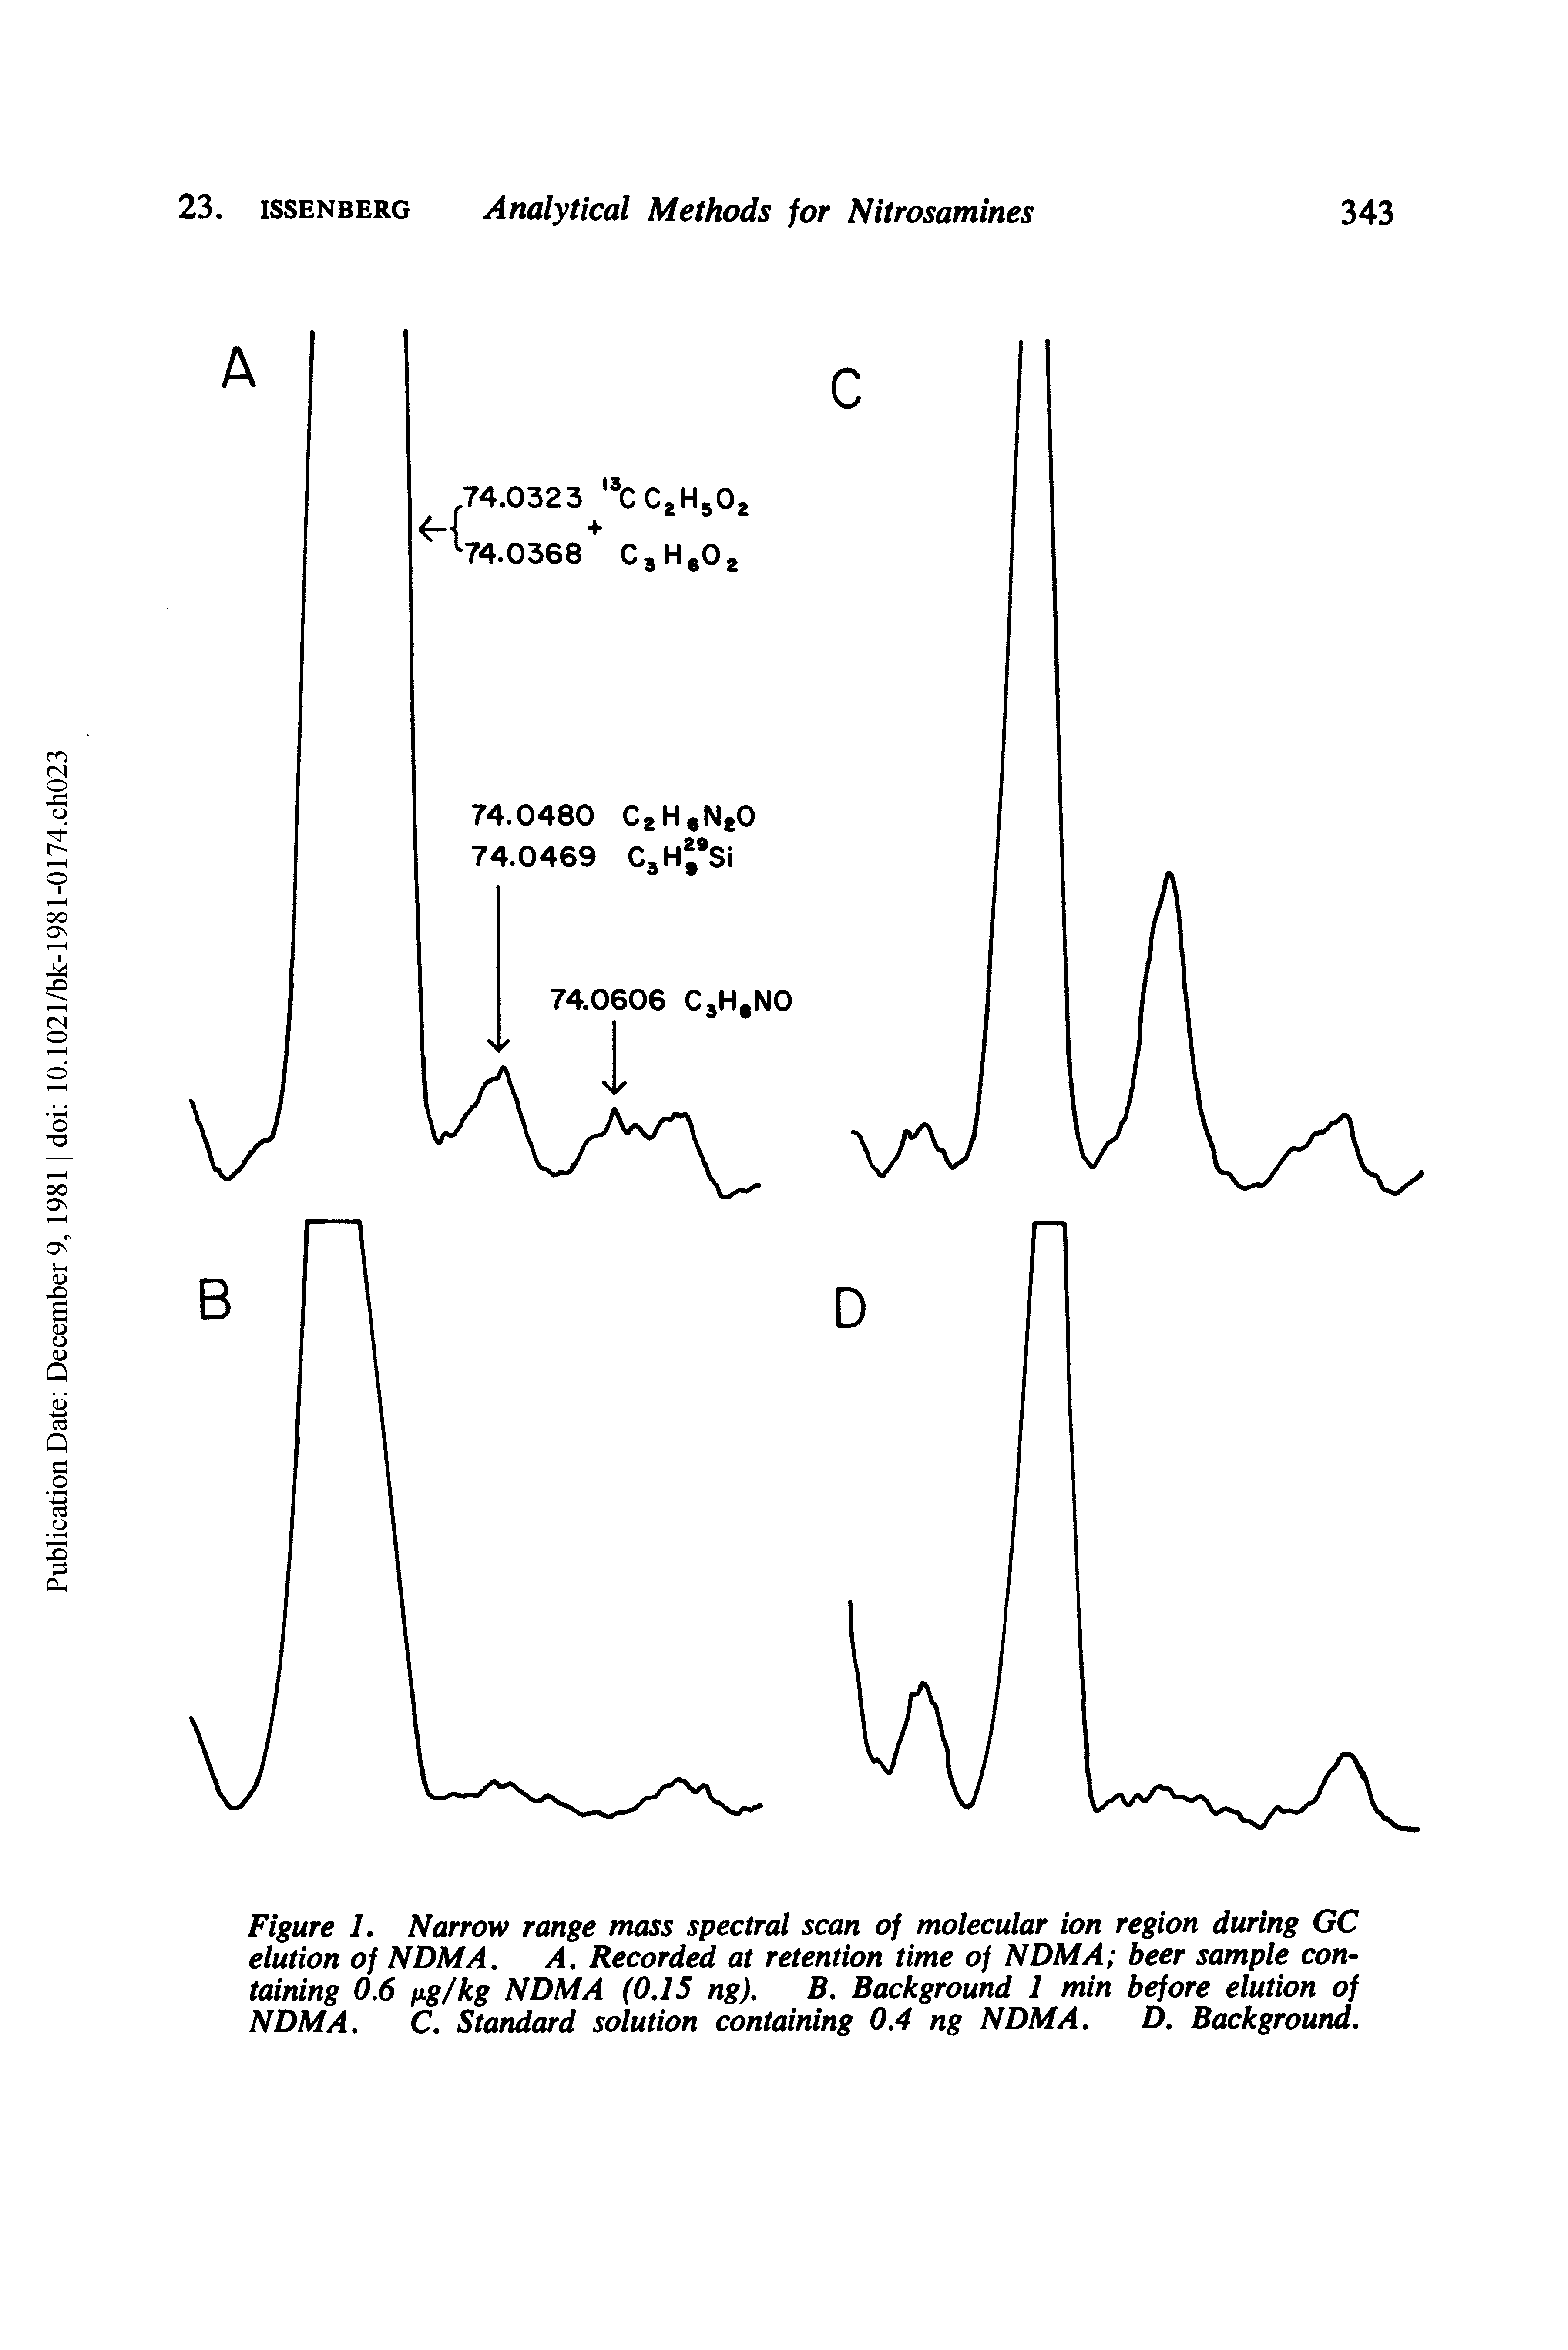 Figure L Narrow range mass spectral scan of molecular ion region during GC elution of NDMA, A, Recorded at retention time of NDMA beer sample con-taining 0.6 fig/kg NDMA (0.15 ng). B. Background 1 min before elution of NDMA. C. Standard solution containing 0.4 ng NDMA. D. Background.